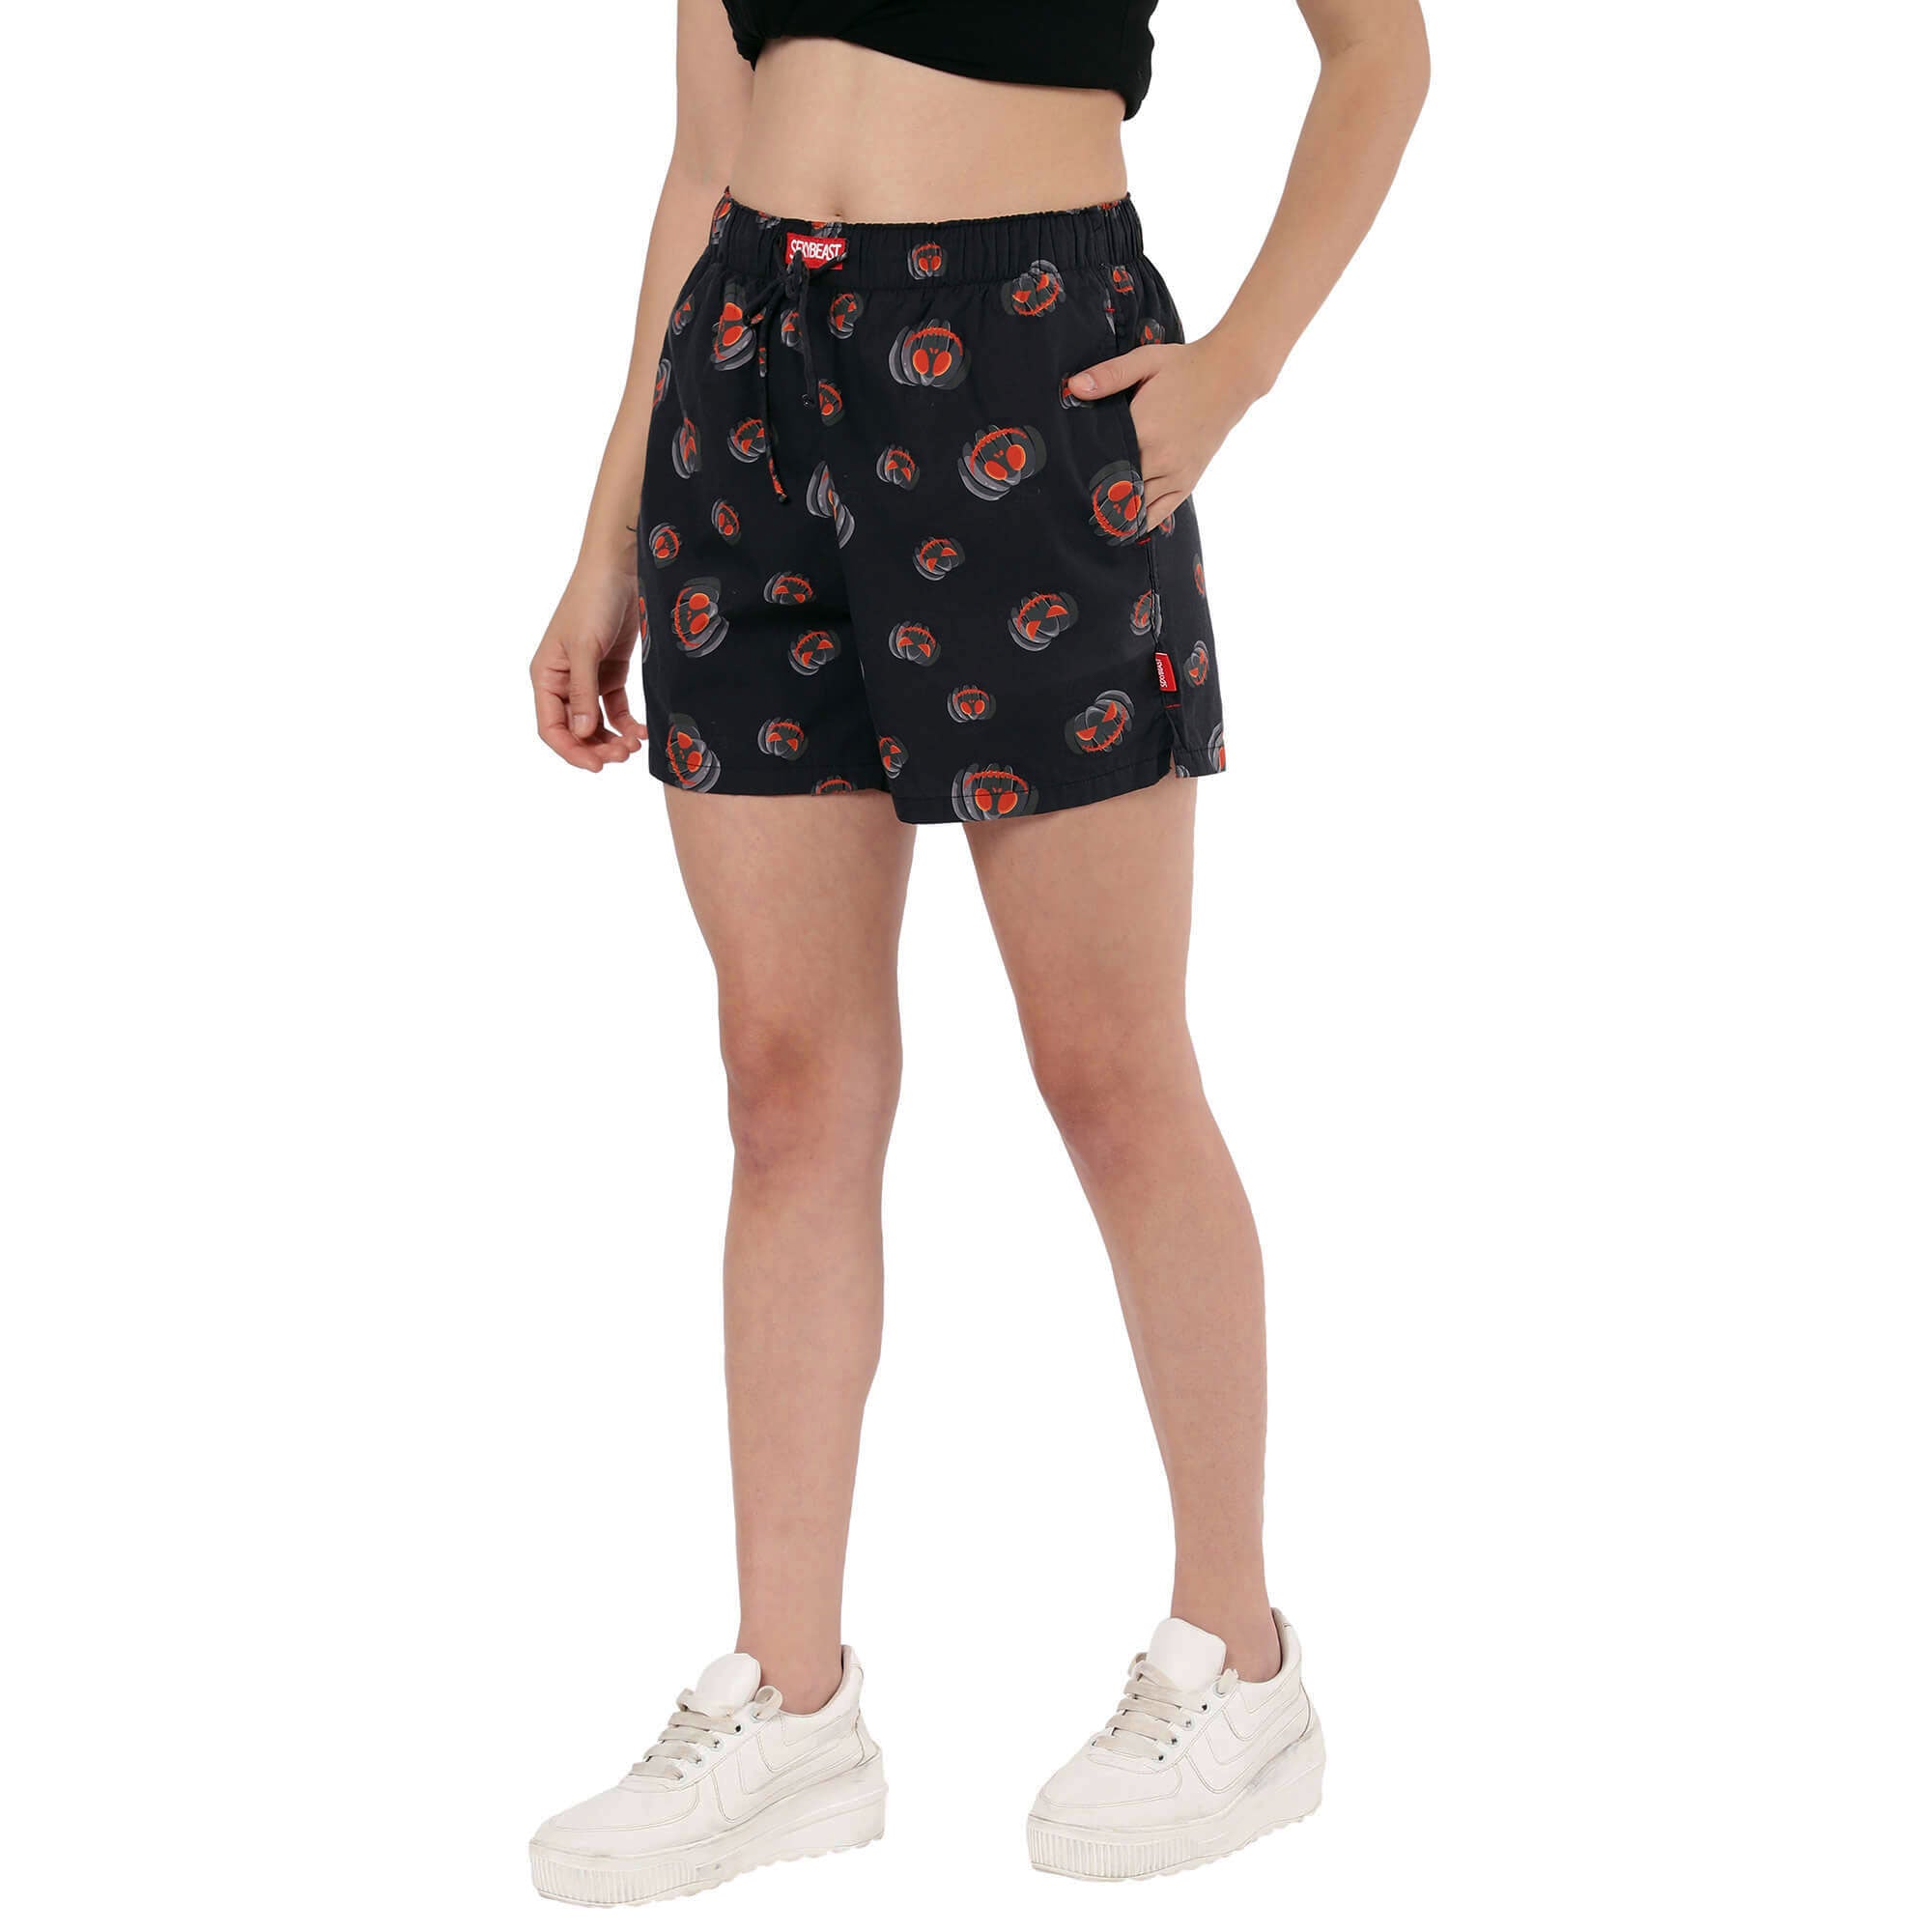 Printed Shorts for Women